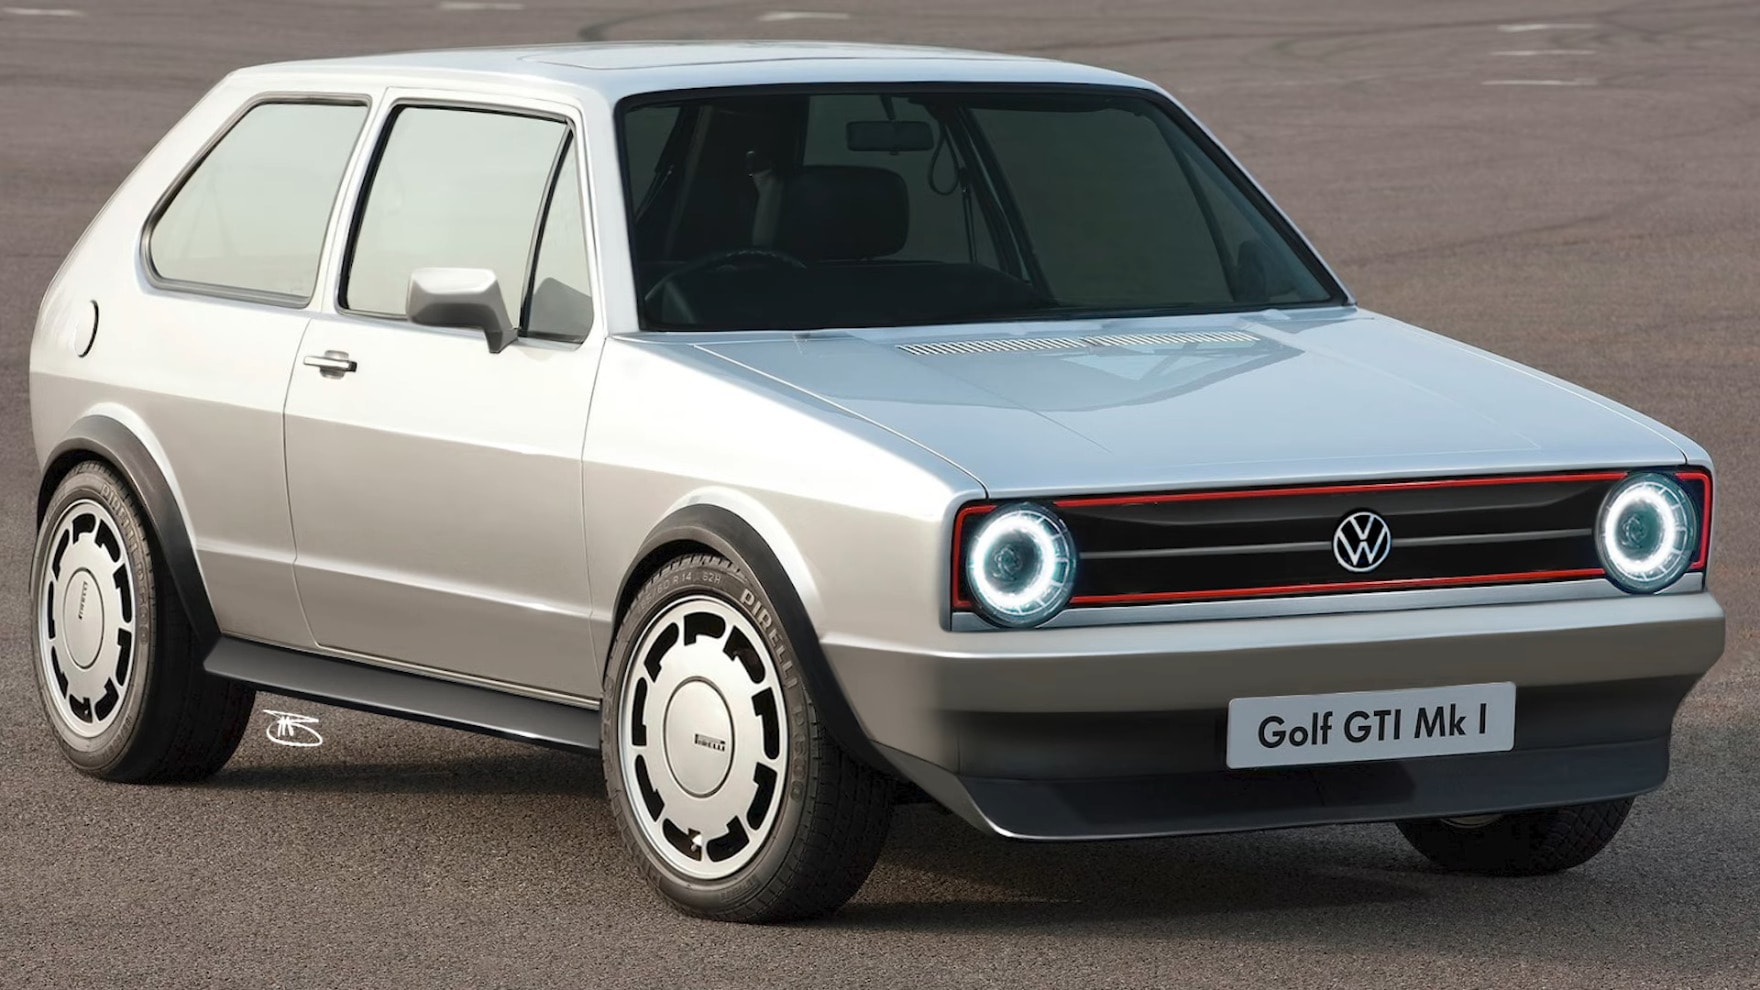 The VW ID.GTI offers an electric throwback experience